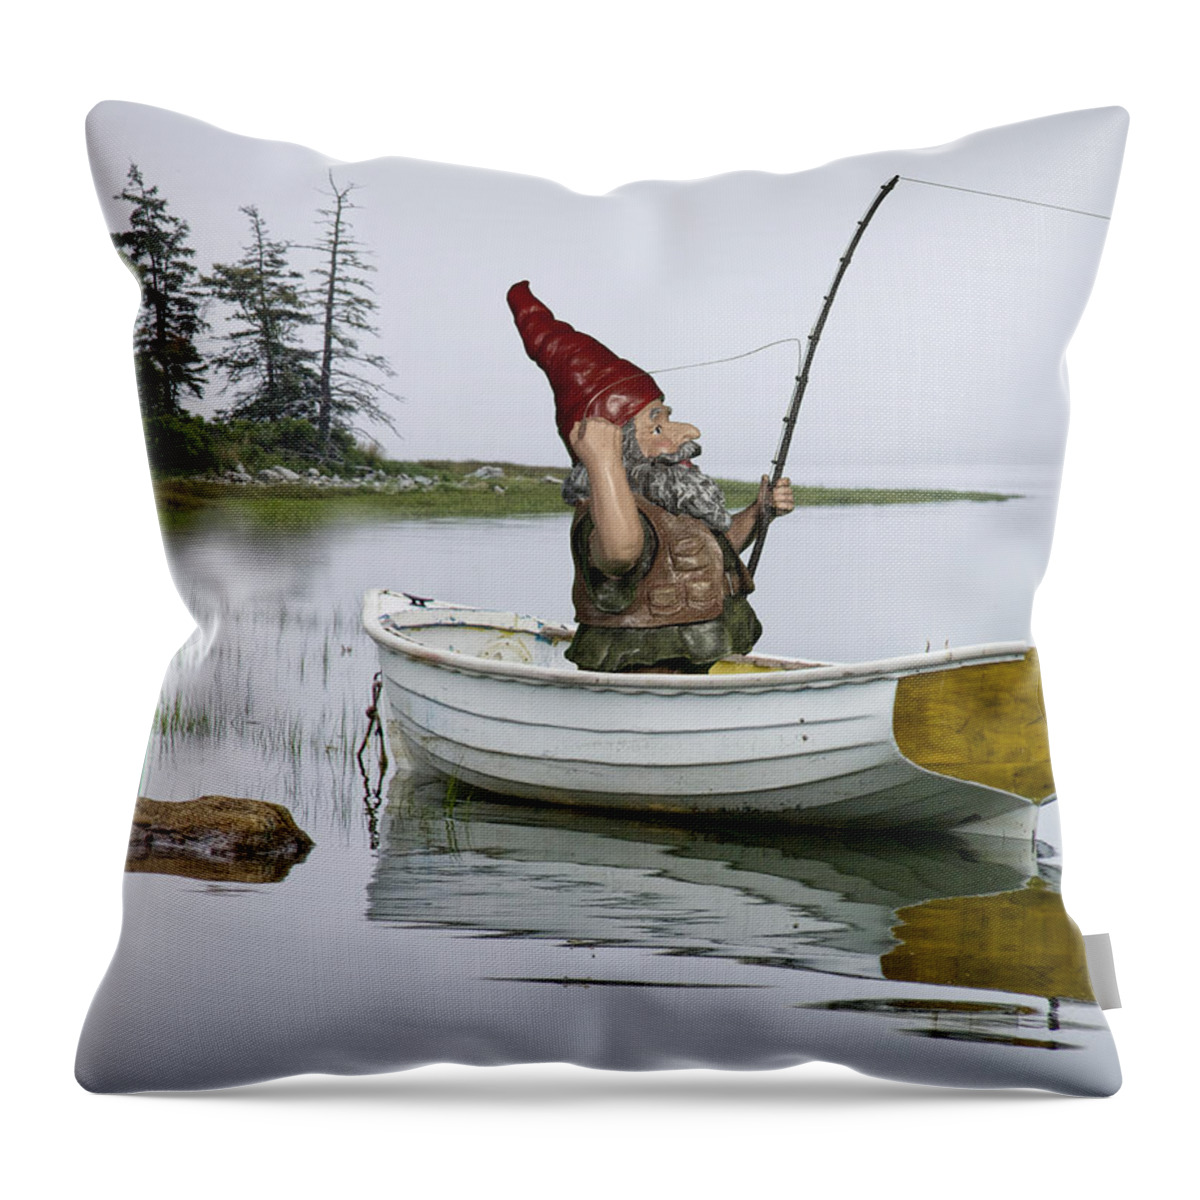 White Boat Throw Pillow featuring the photograph Gnome Fisherman in a White Maine Boat on a Foggy Morning by Randall Nyhof